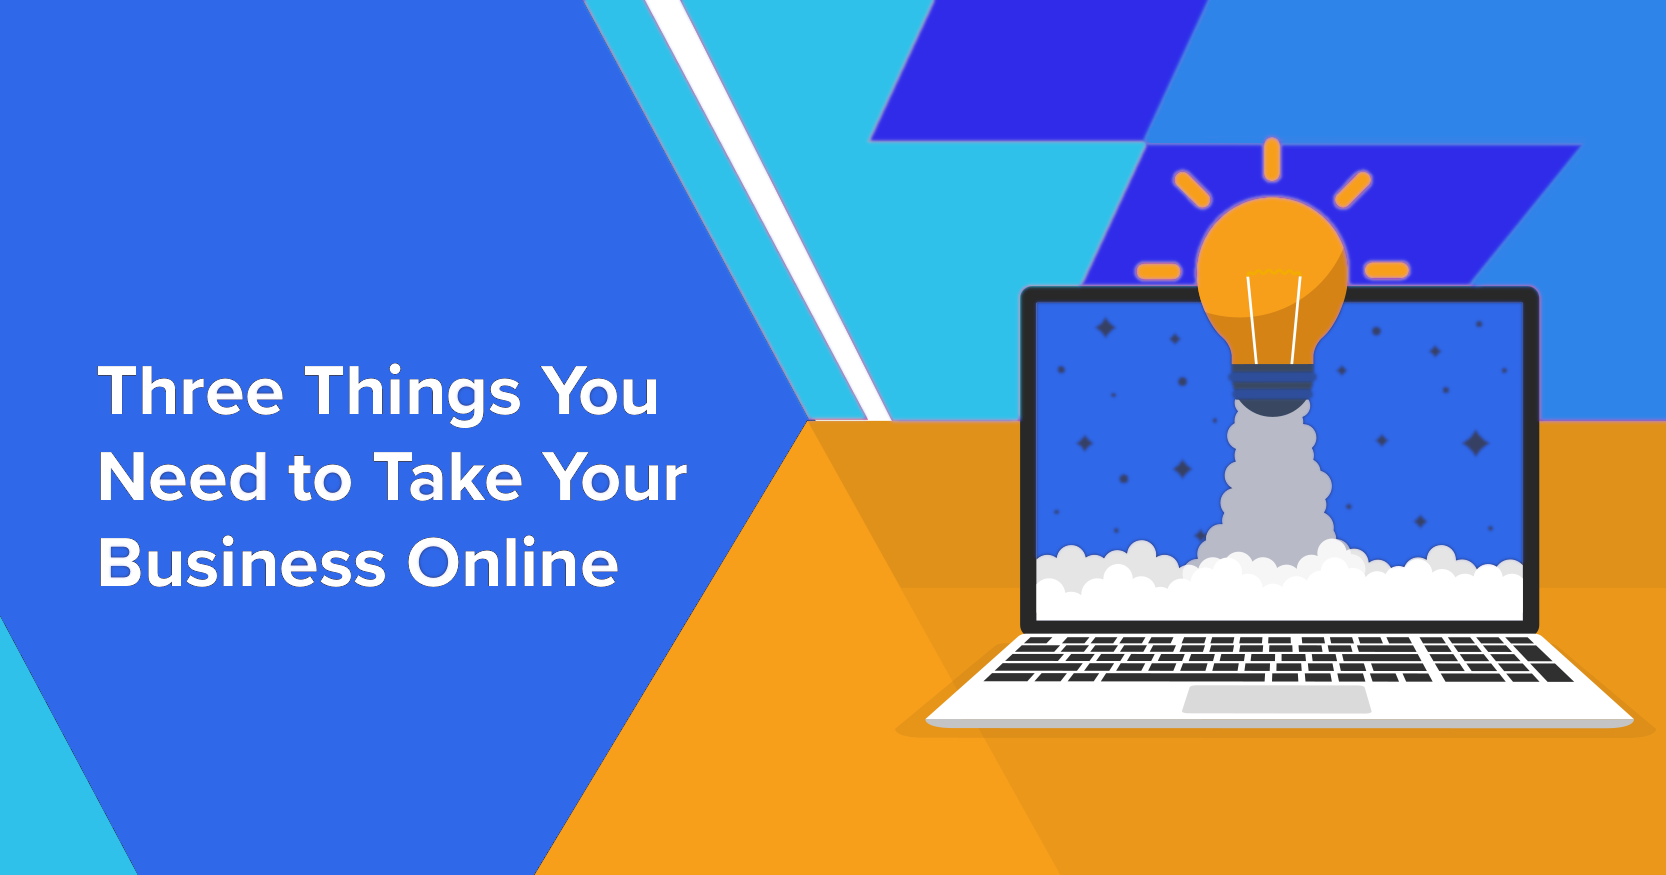 navigate the internet and build your marketing business online three things you need to take your marketing business online